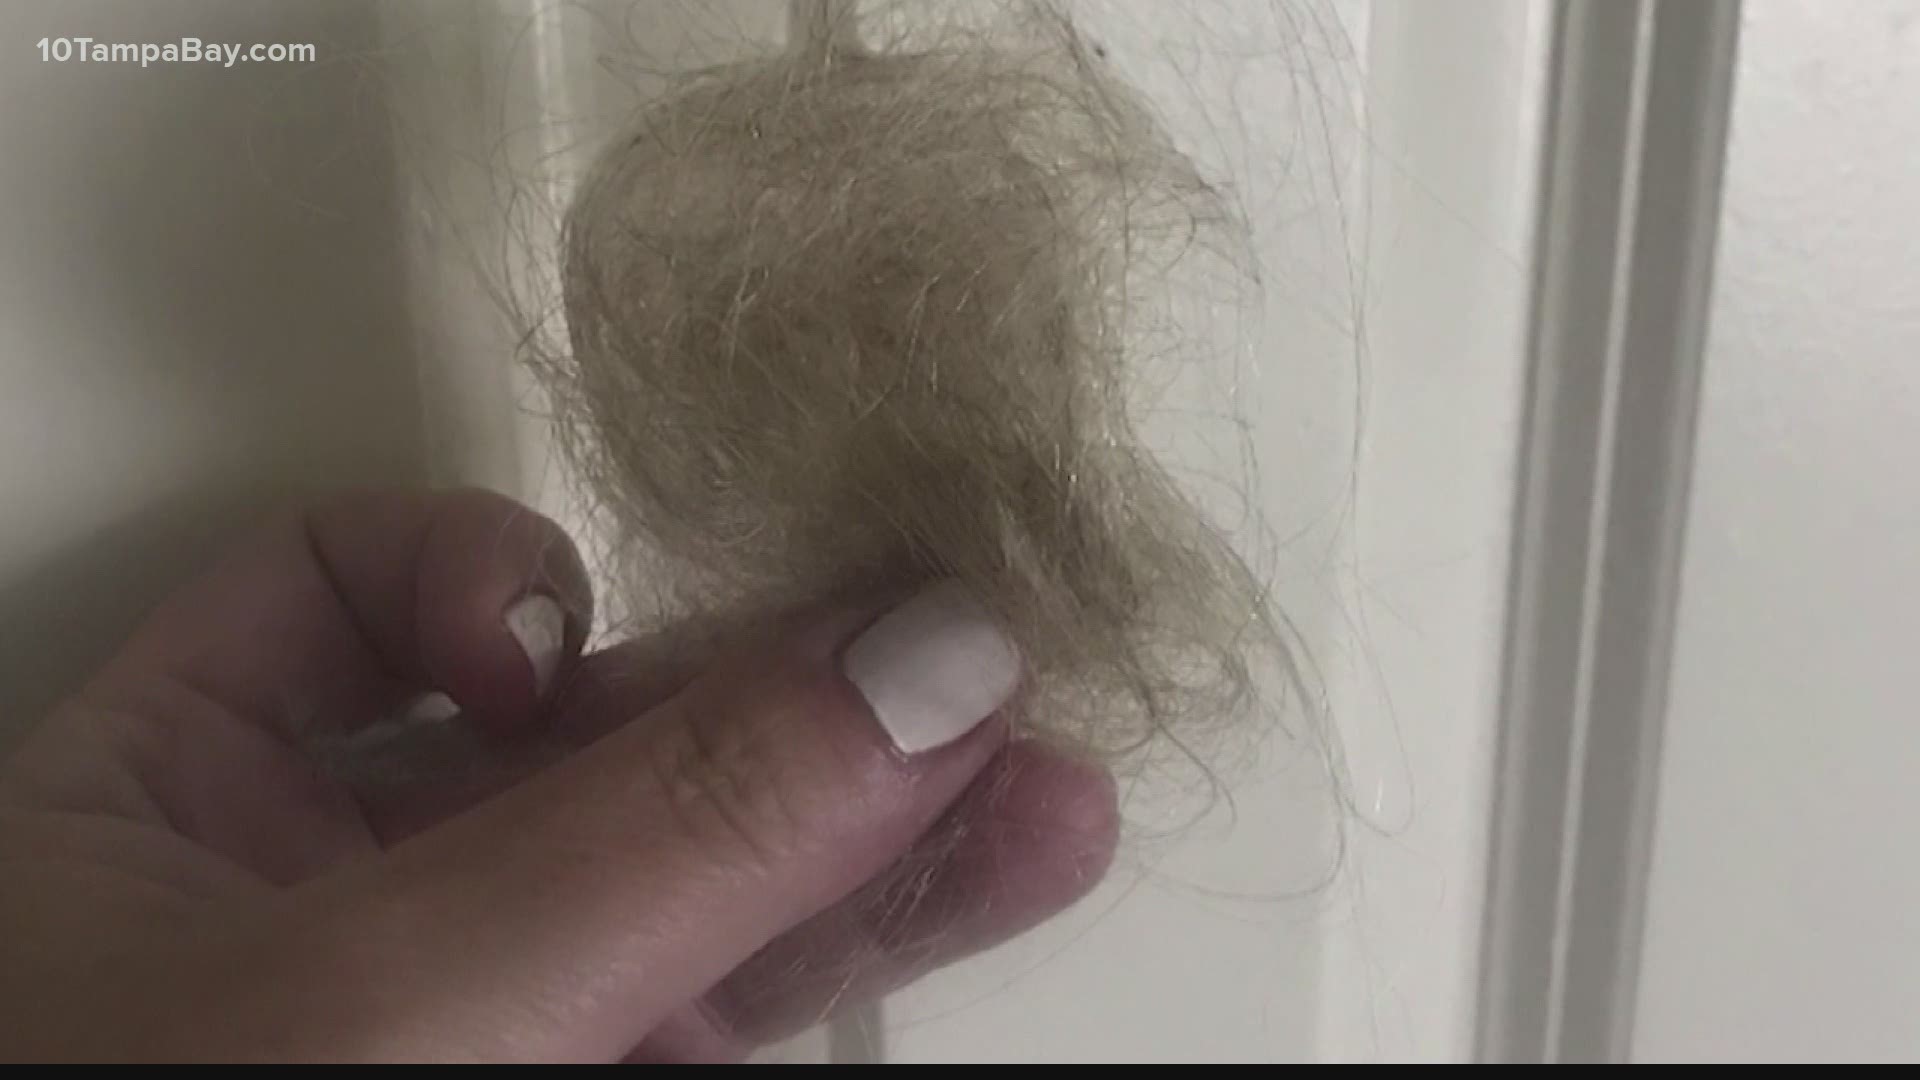 Some people dealing with hair loss months after having COVID-19 